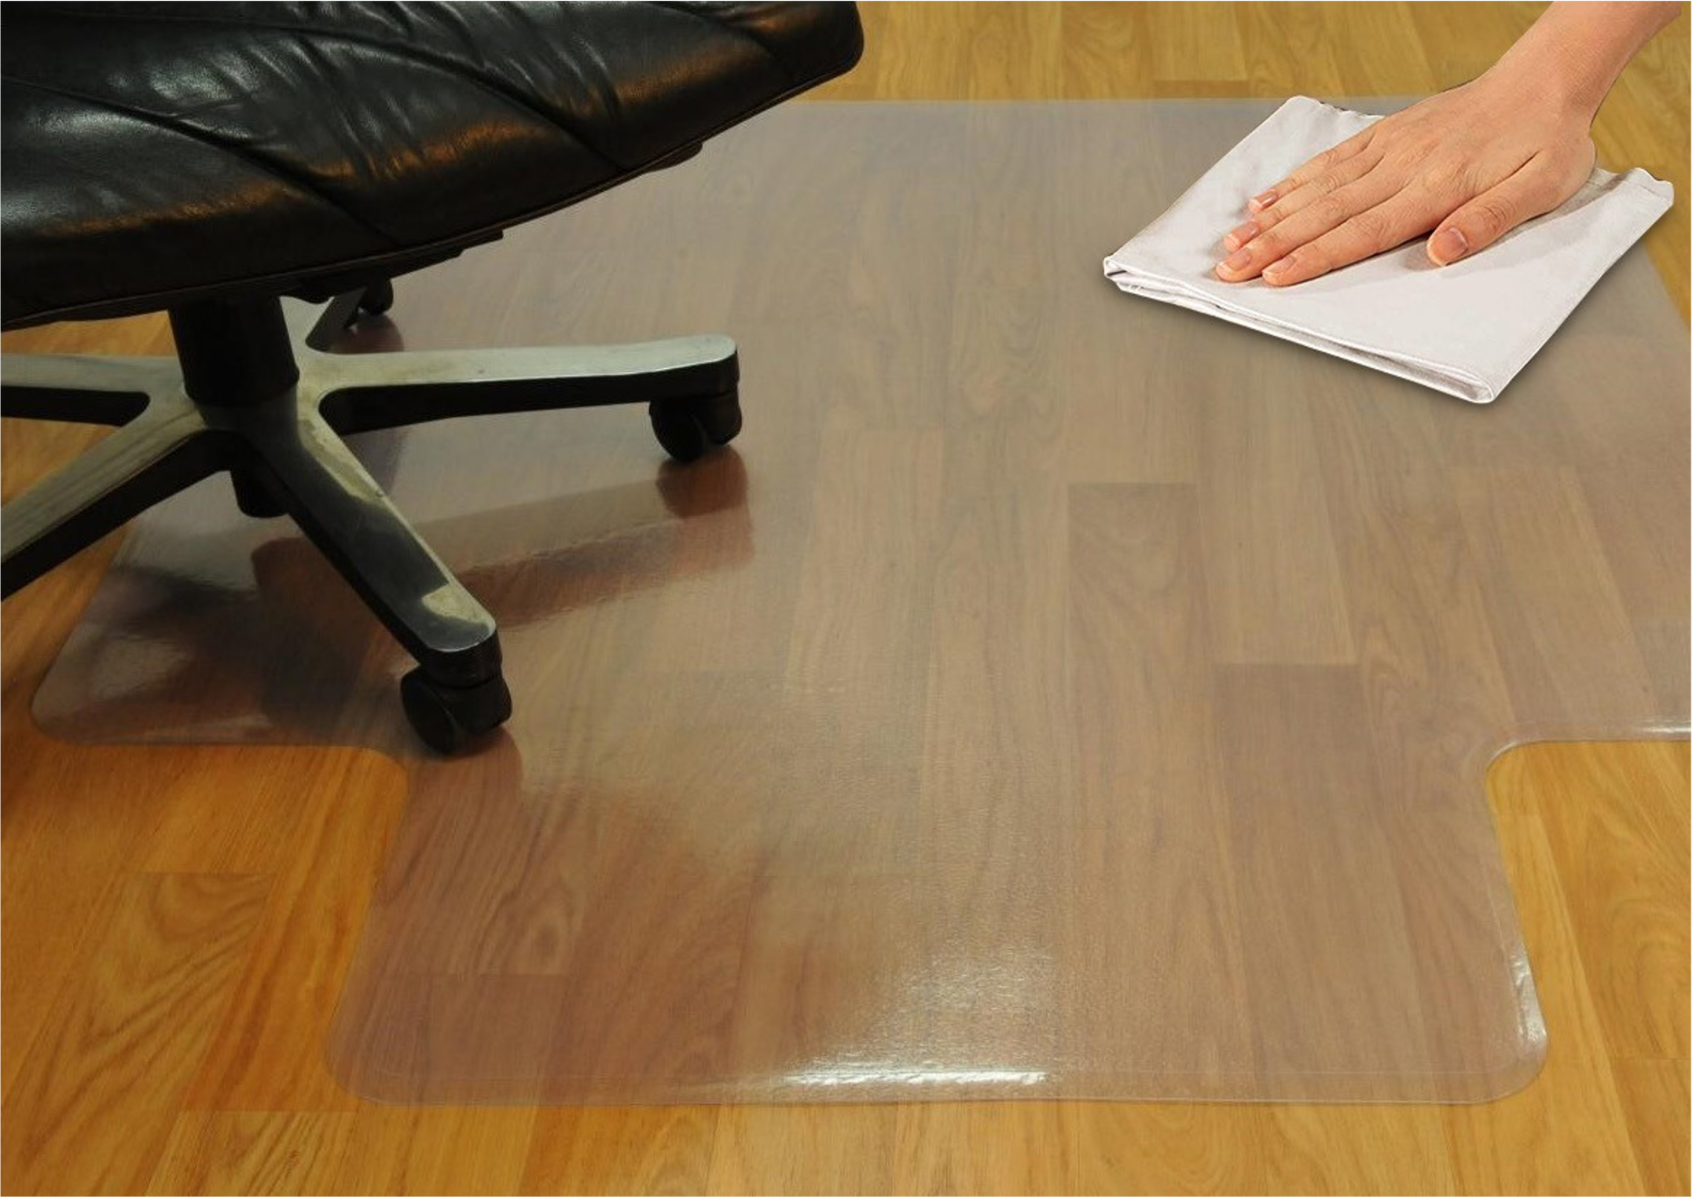 A hand wipes a chair mat to demonstrate its easy maintenance.